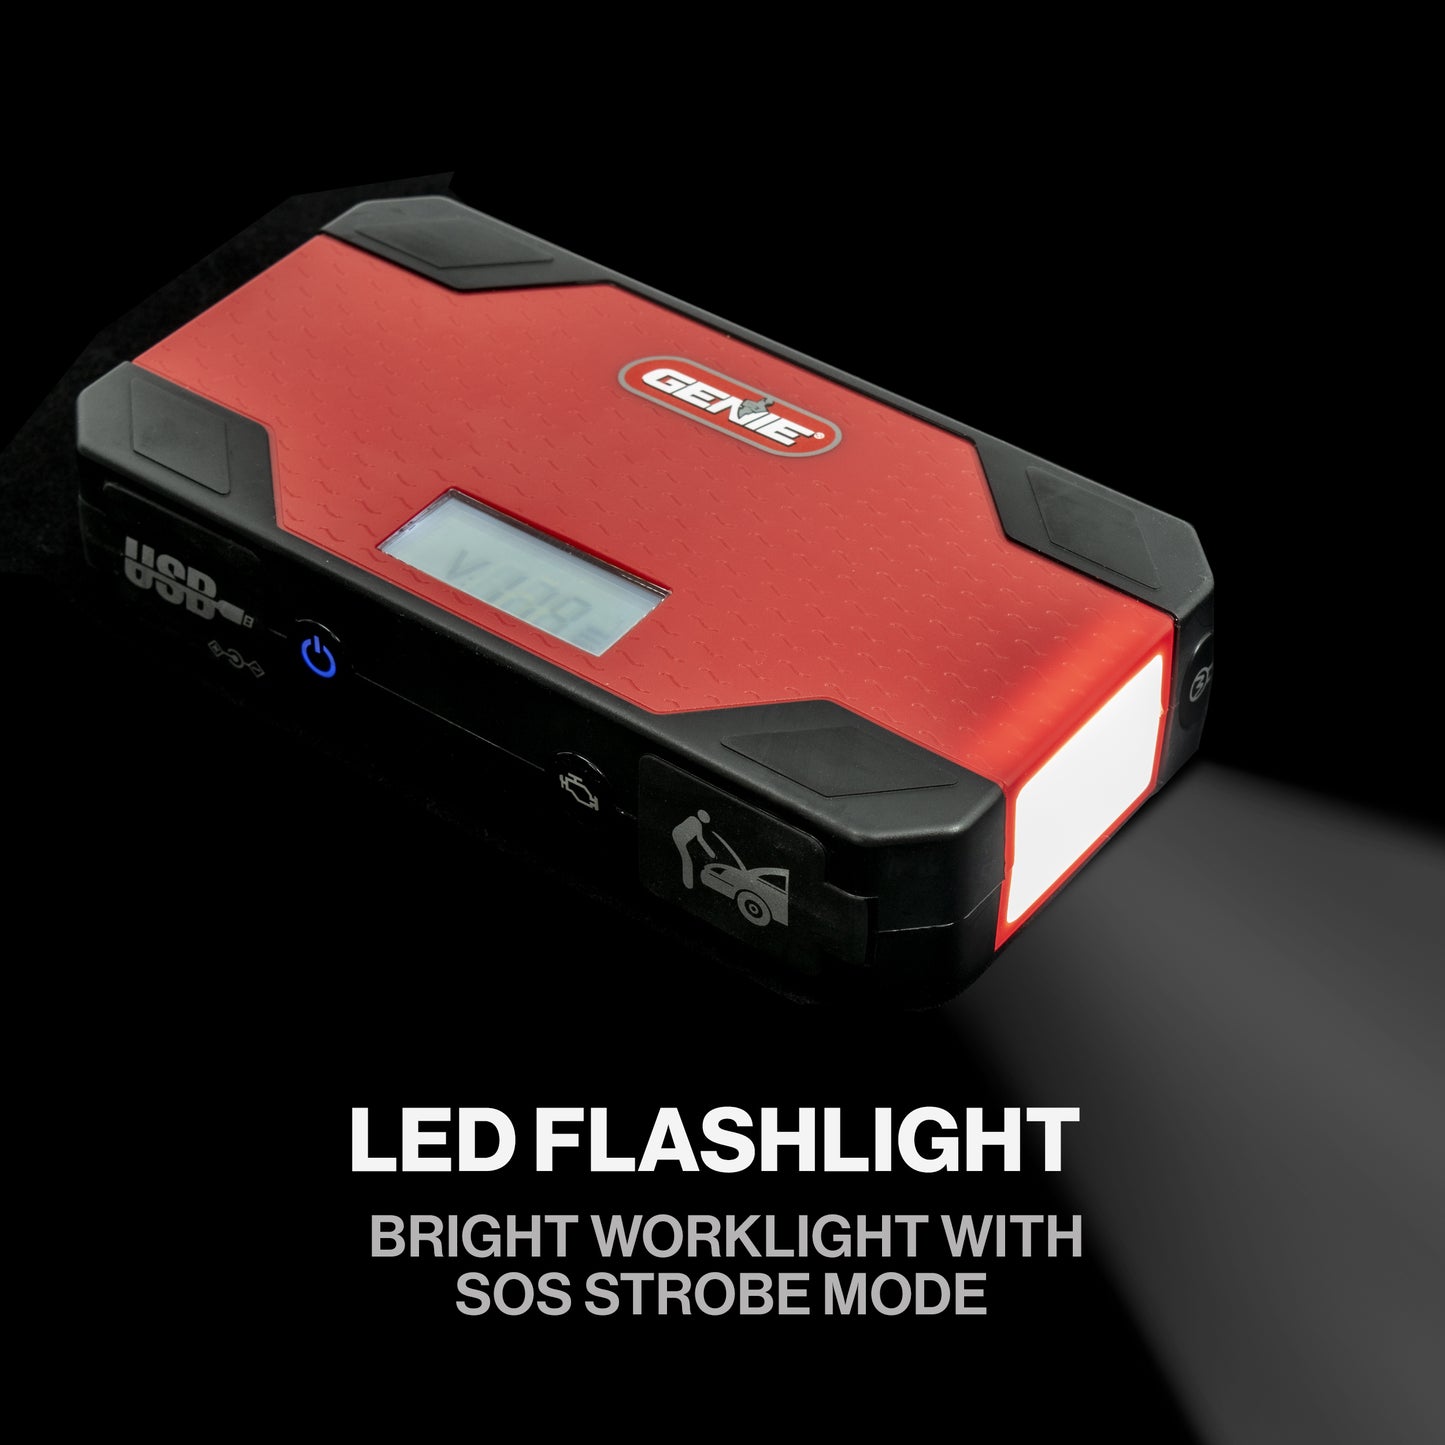 The Reliavolt Portable emergency tool comes with a LED flashlight with SOS strobe option